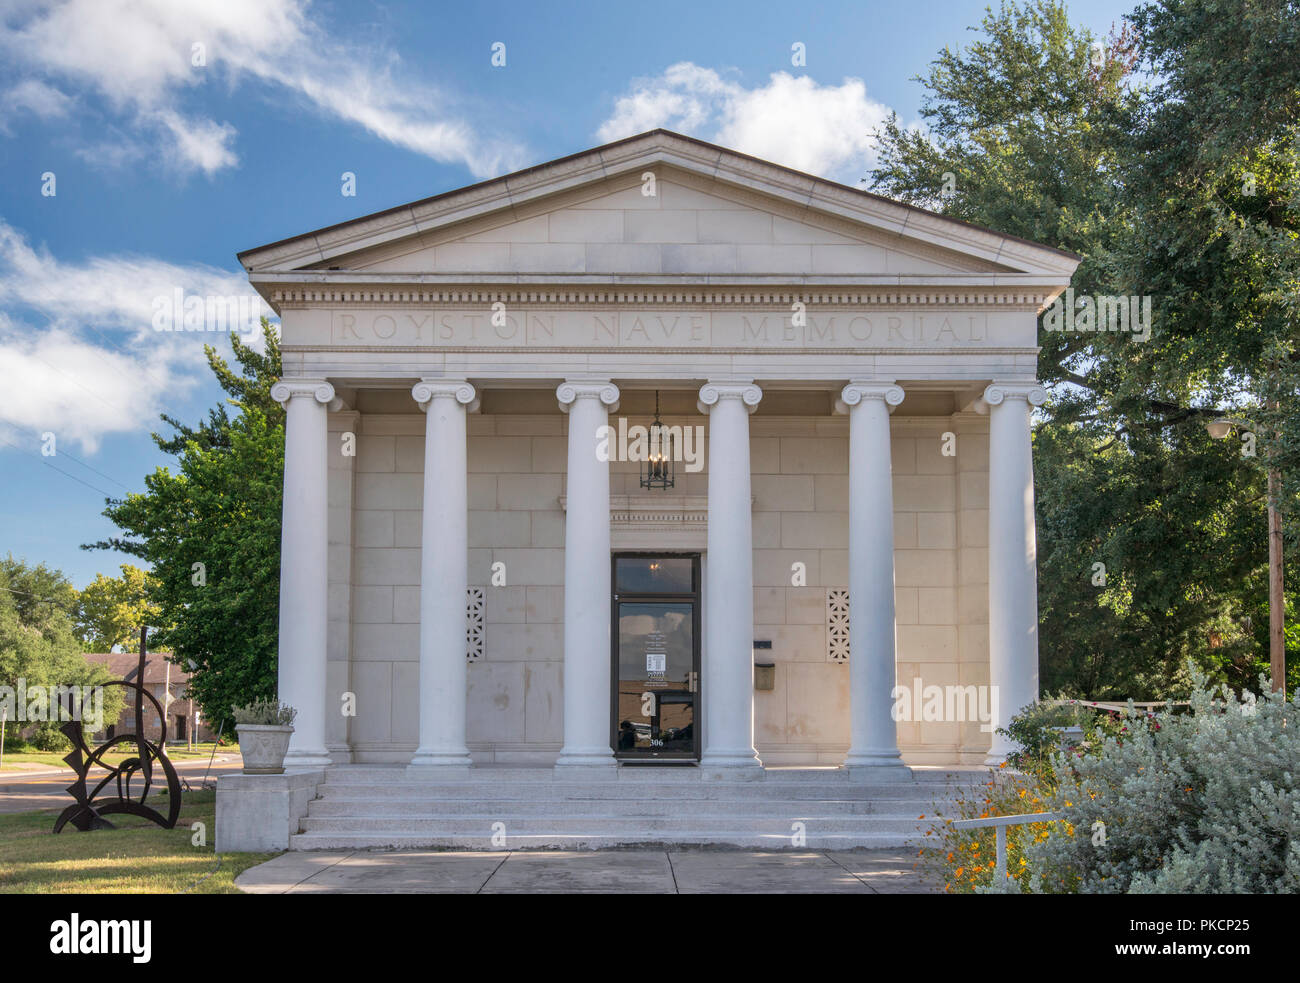 Nave Museum, at Royston Nave Memorial building, 1932, Greek Revival style, historic district near center of Victoria, Texas, USA Stock Photo